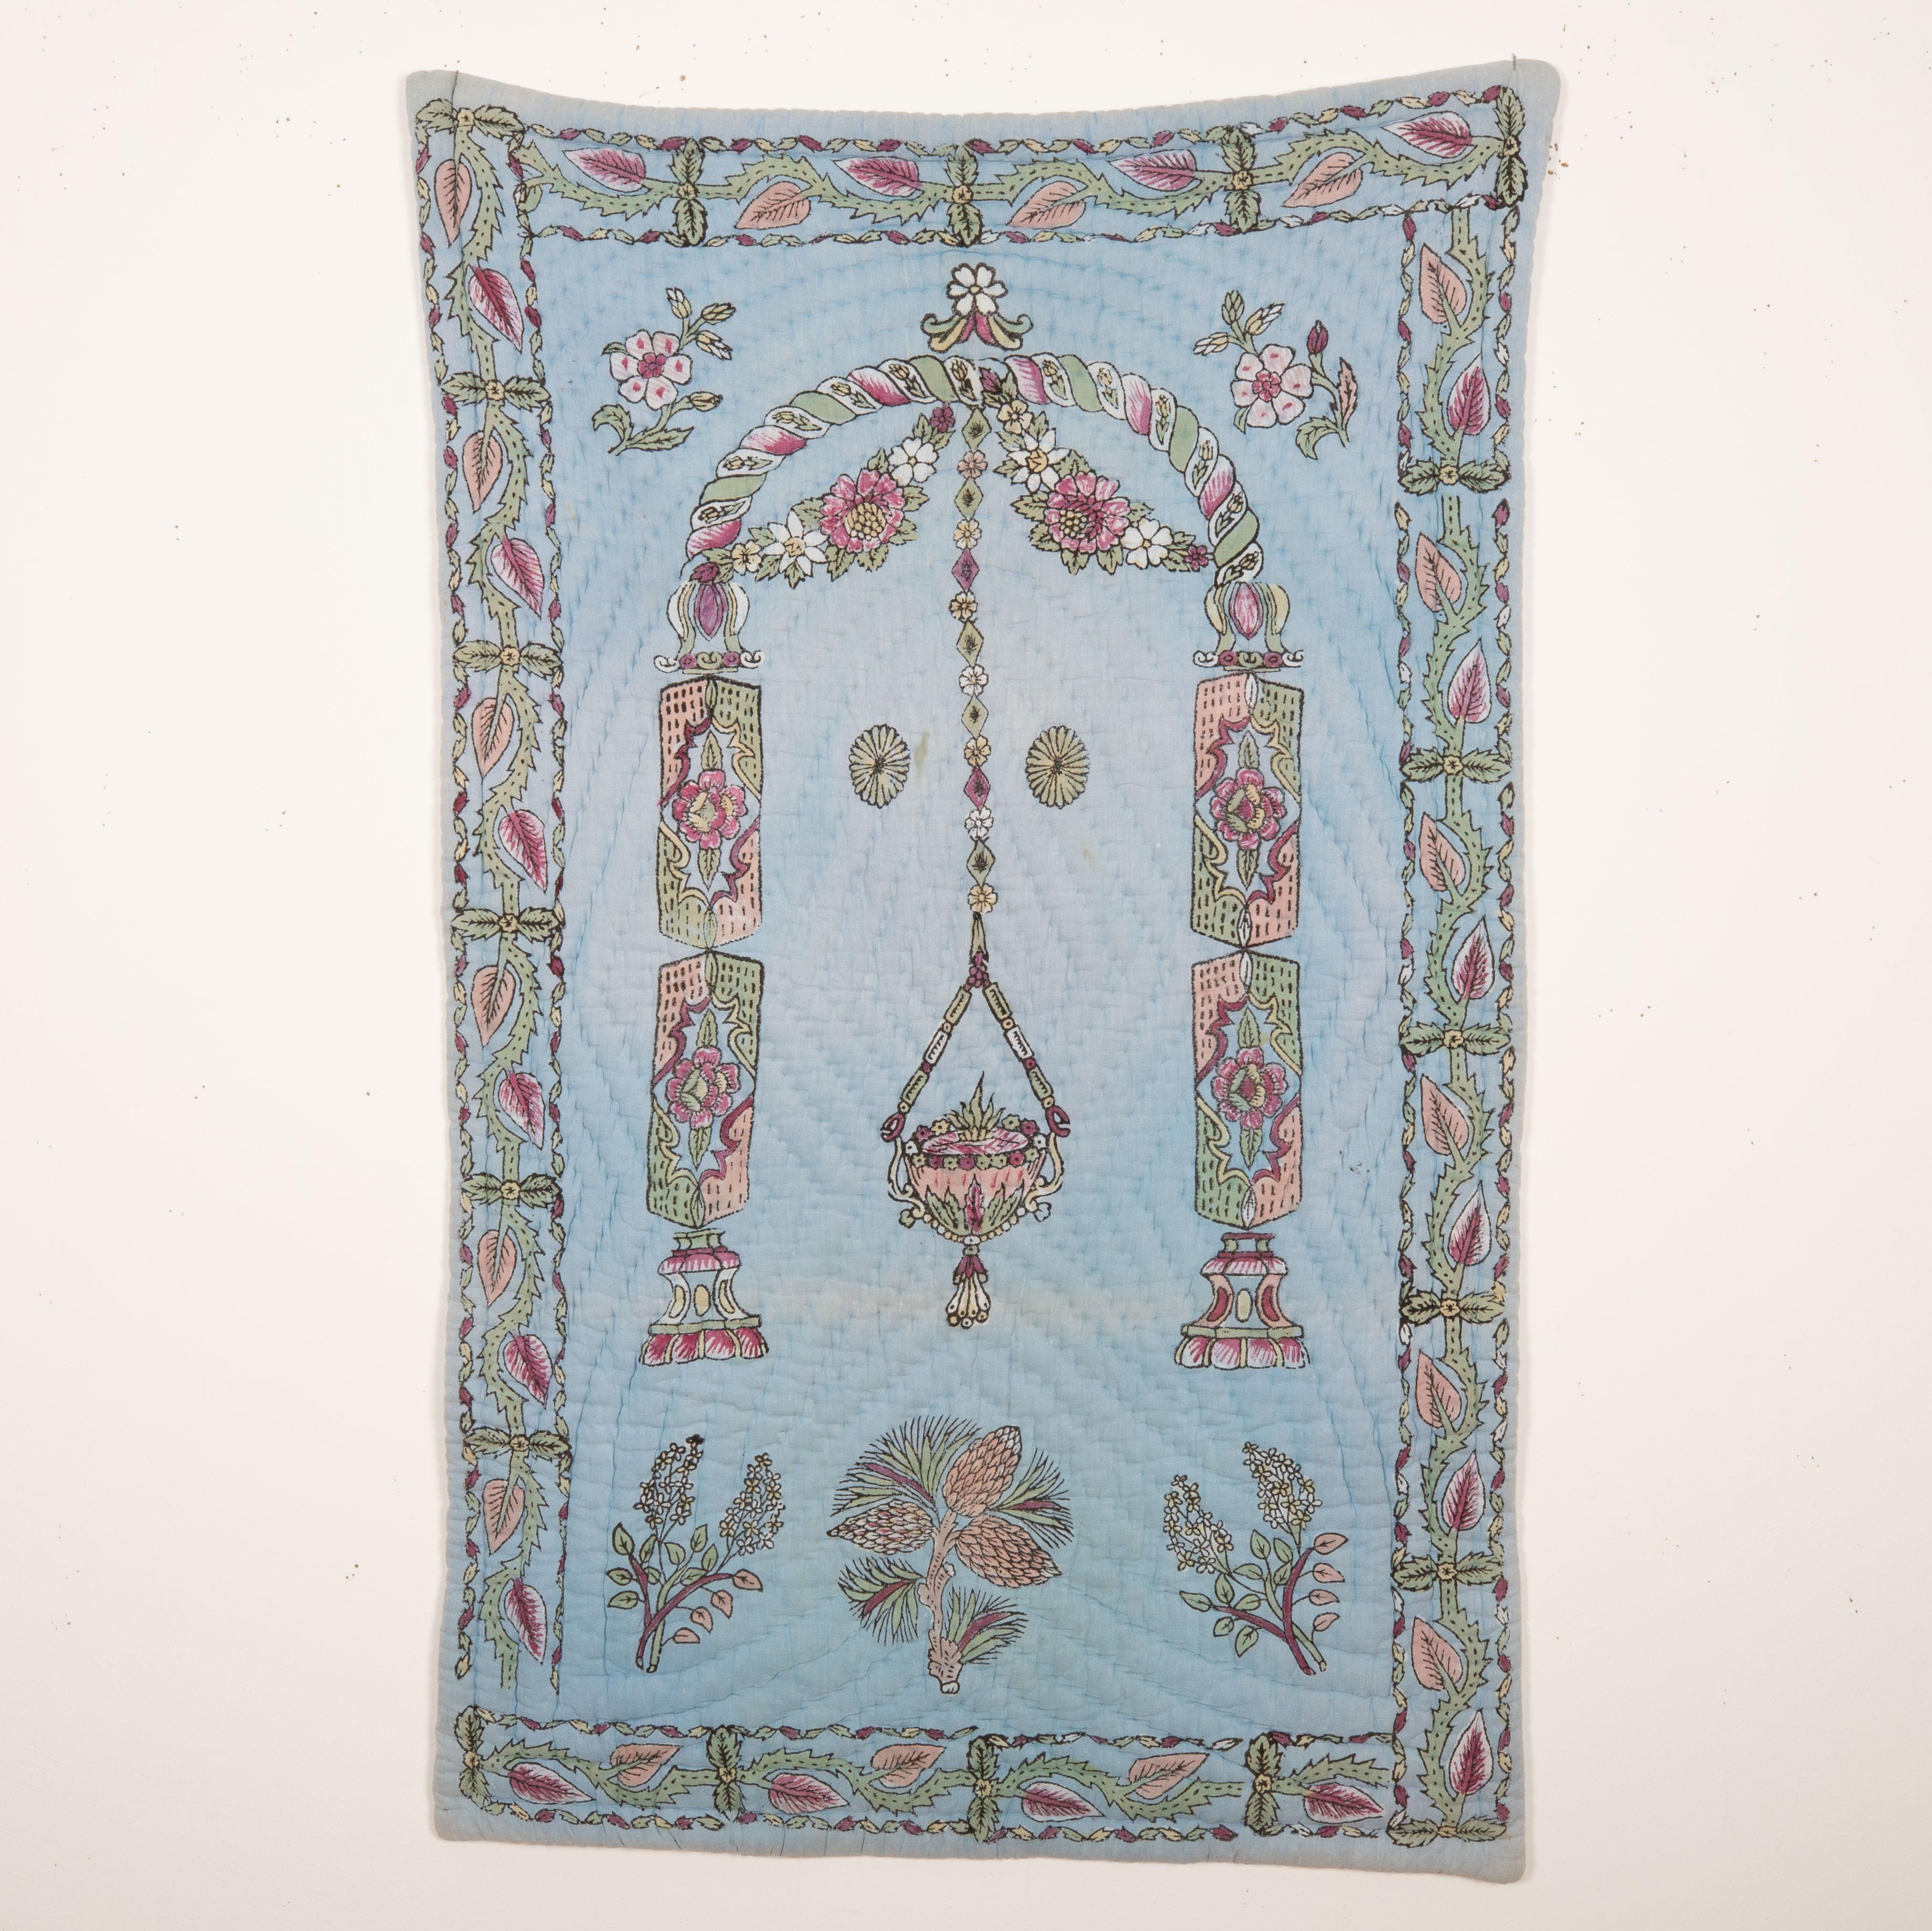 Hand Block Printed Anatolian Quilt, Early 20th C.
Hand block printing is one of the land marks of Western Anatolian material culture. These quilts have been used either as prayer mats of wall hangings.